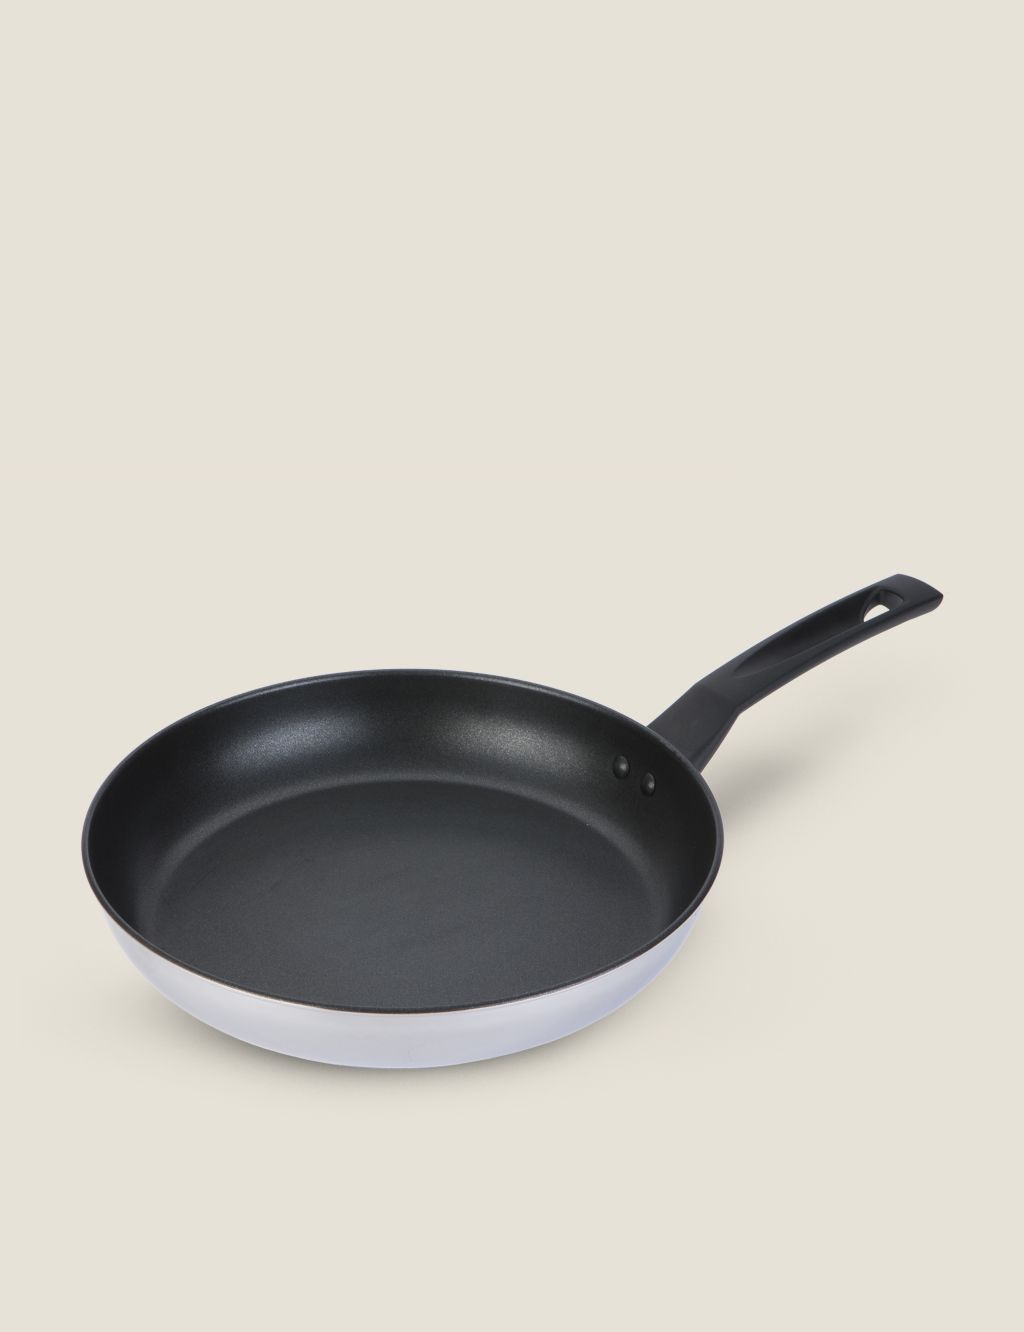 Stainless Steel 29cm Large Frying Pan image 1